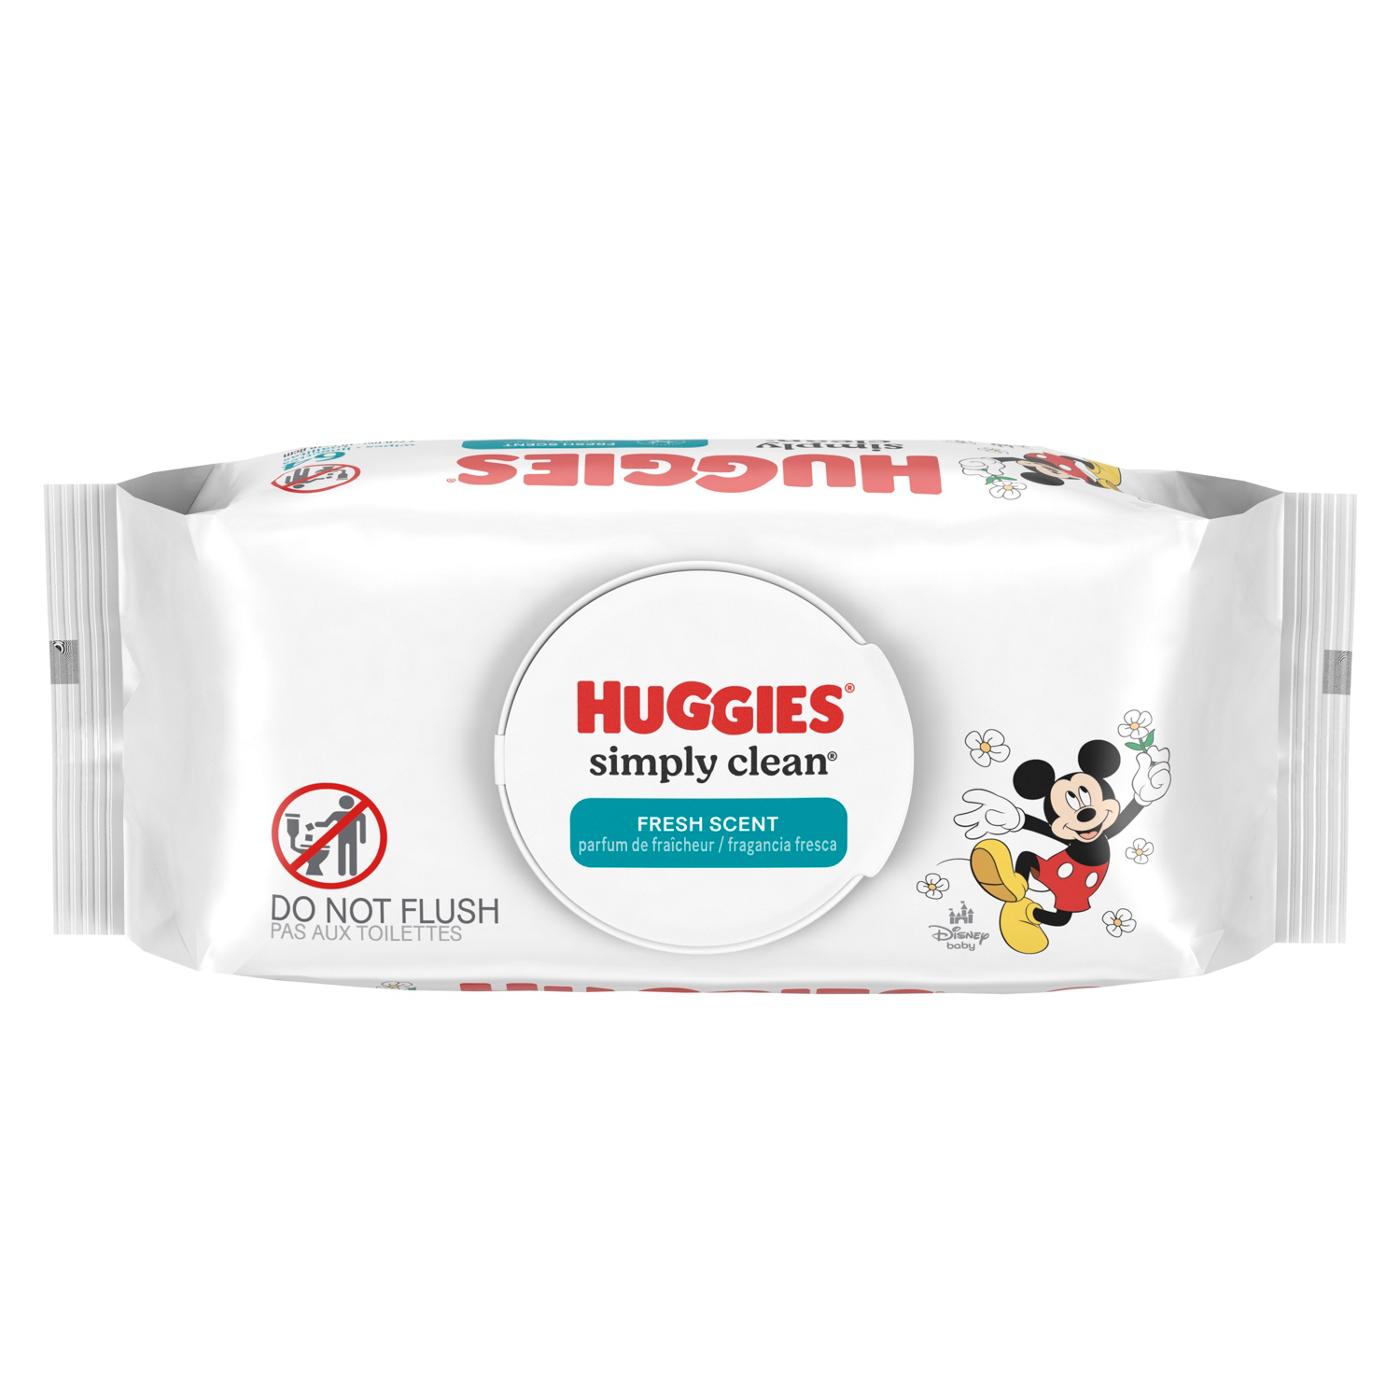 Huggies Simply Clean Baby Wipes - Fresh Scent; image 1 of 2